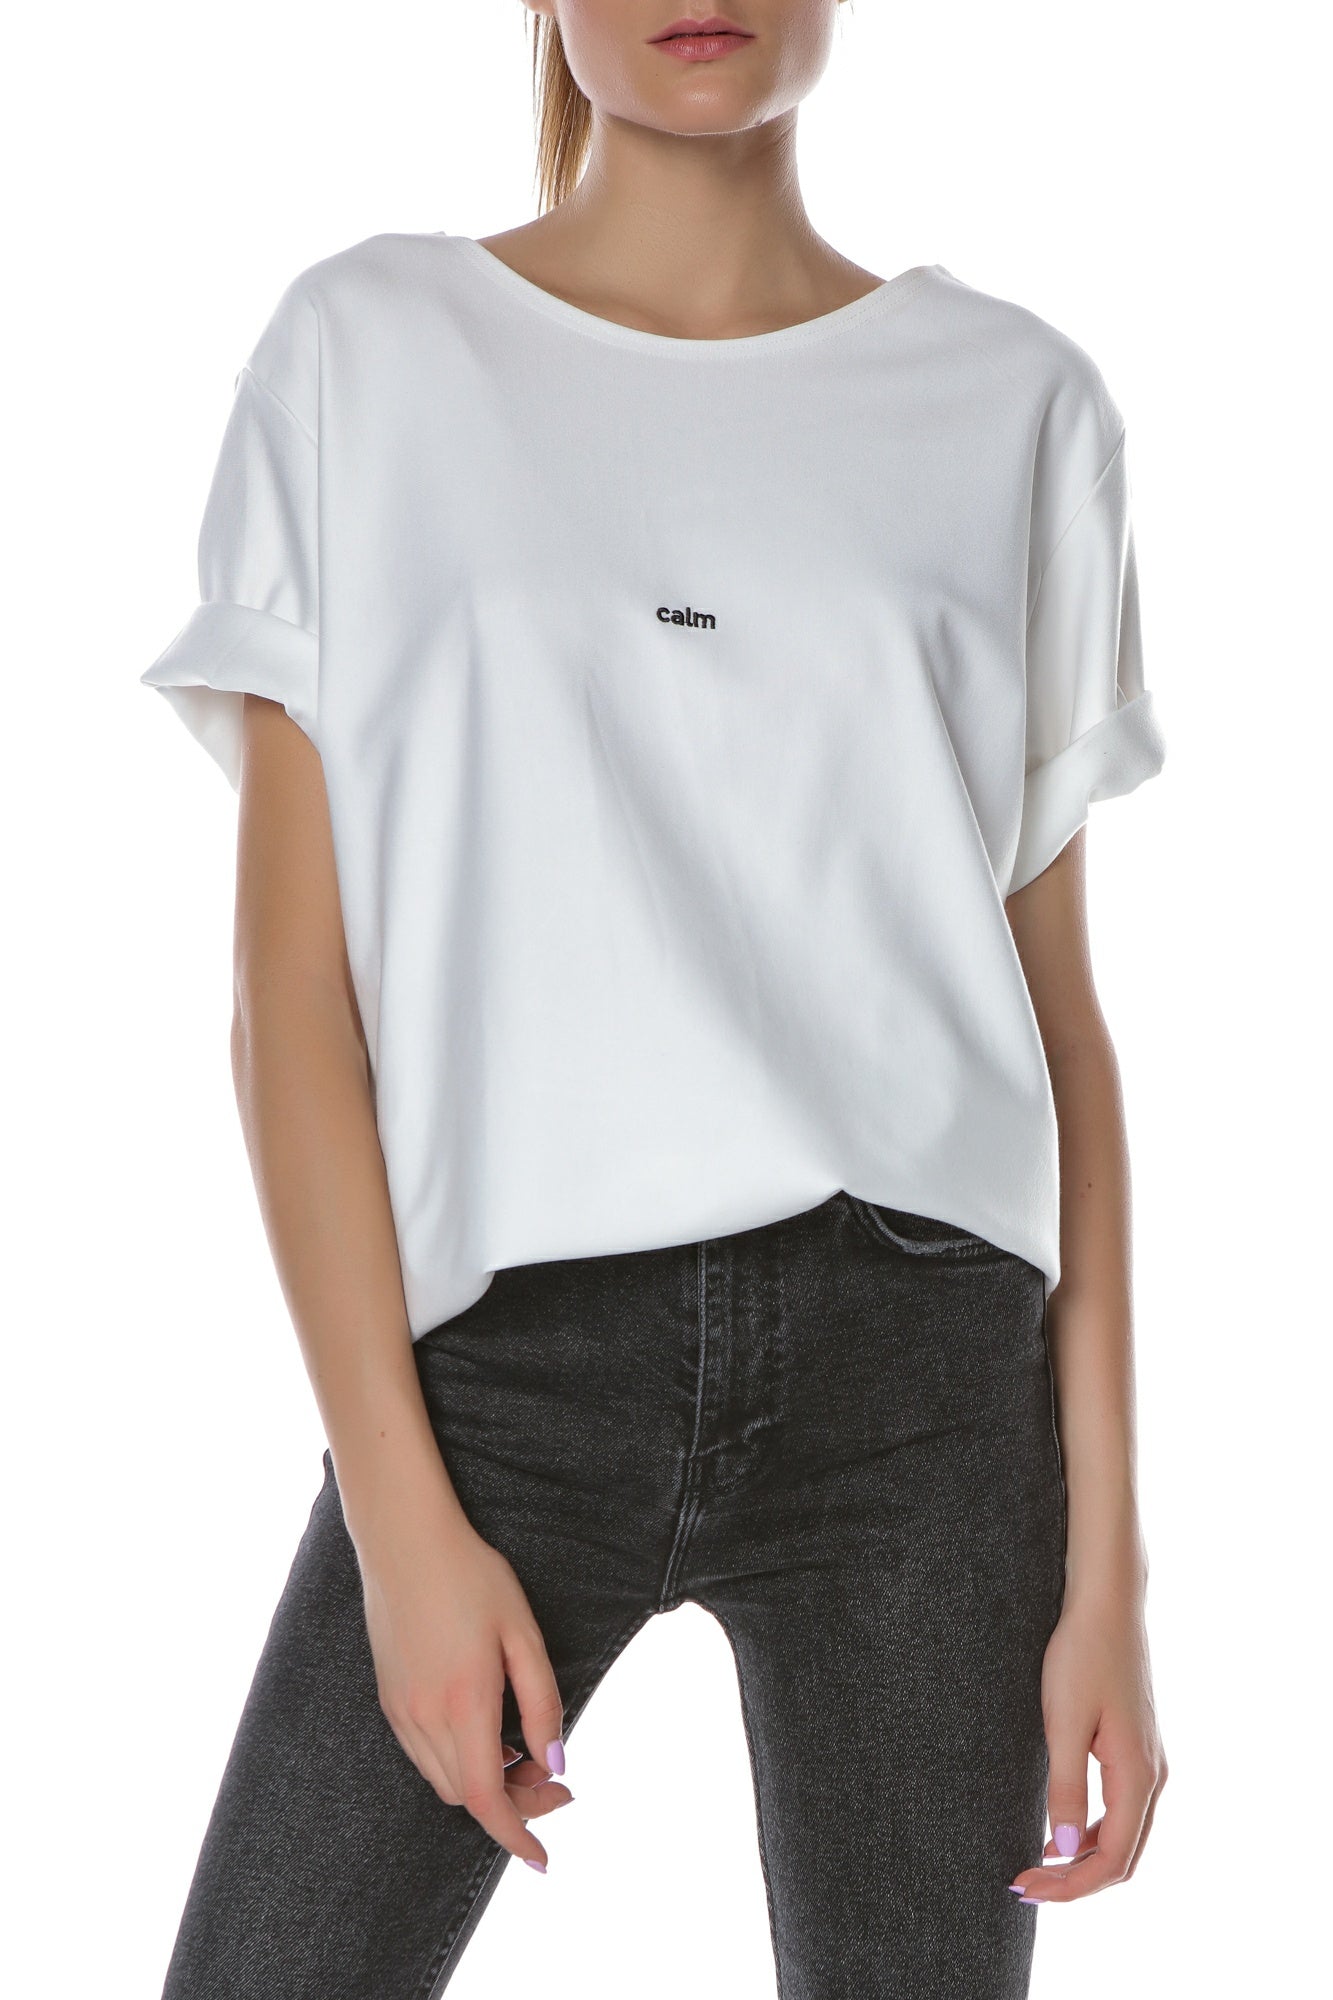 CALM embroidered W WHITE T-shirt